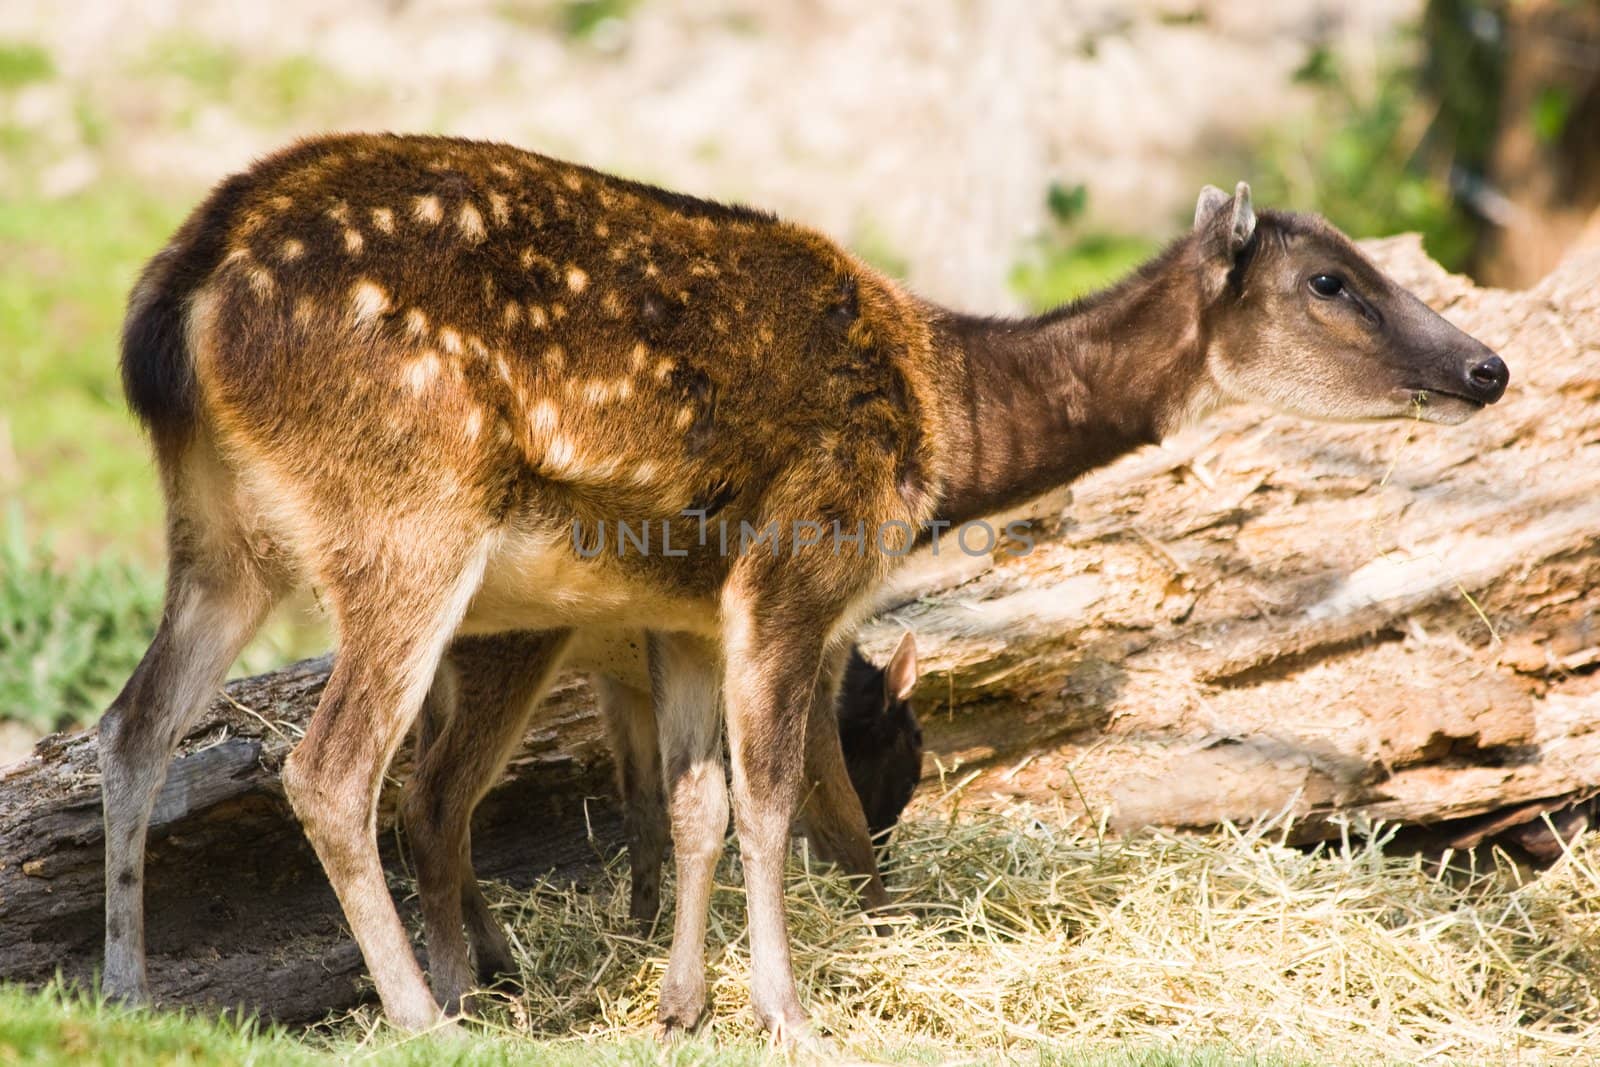 Philippine spotted deer by Colette